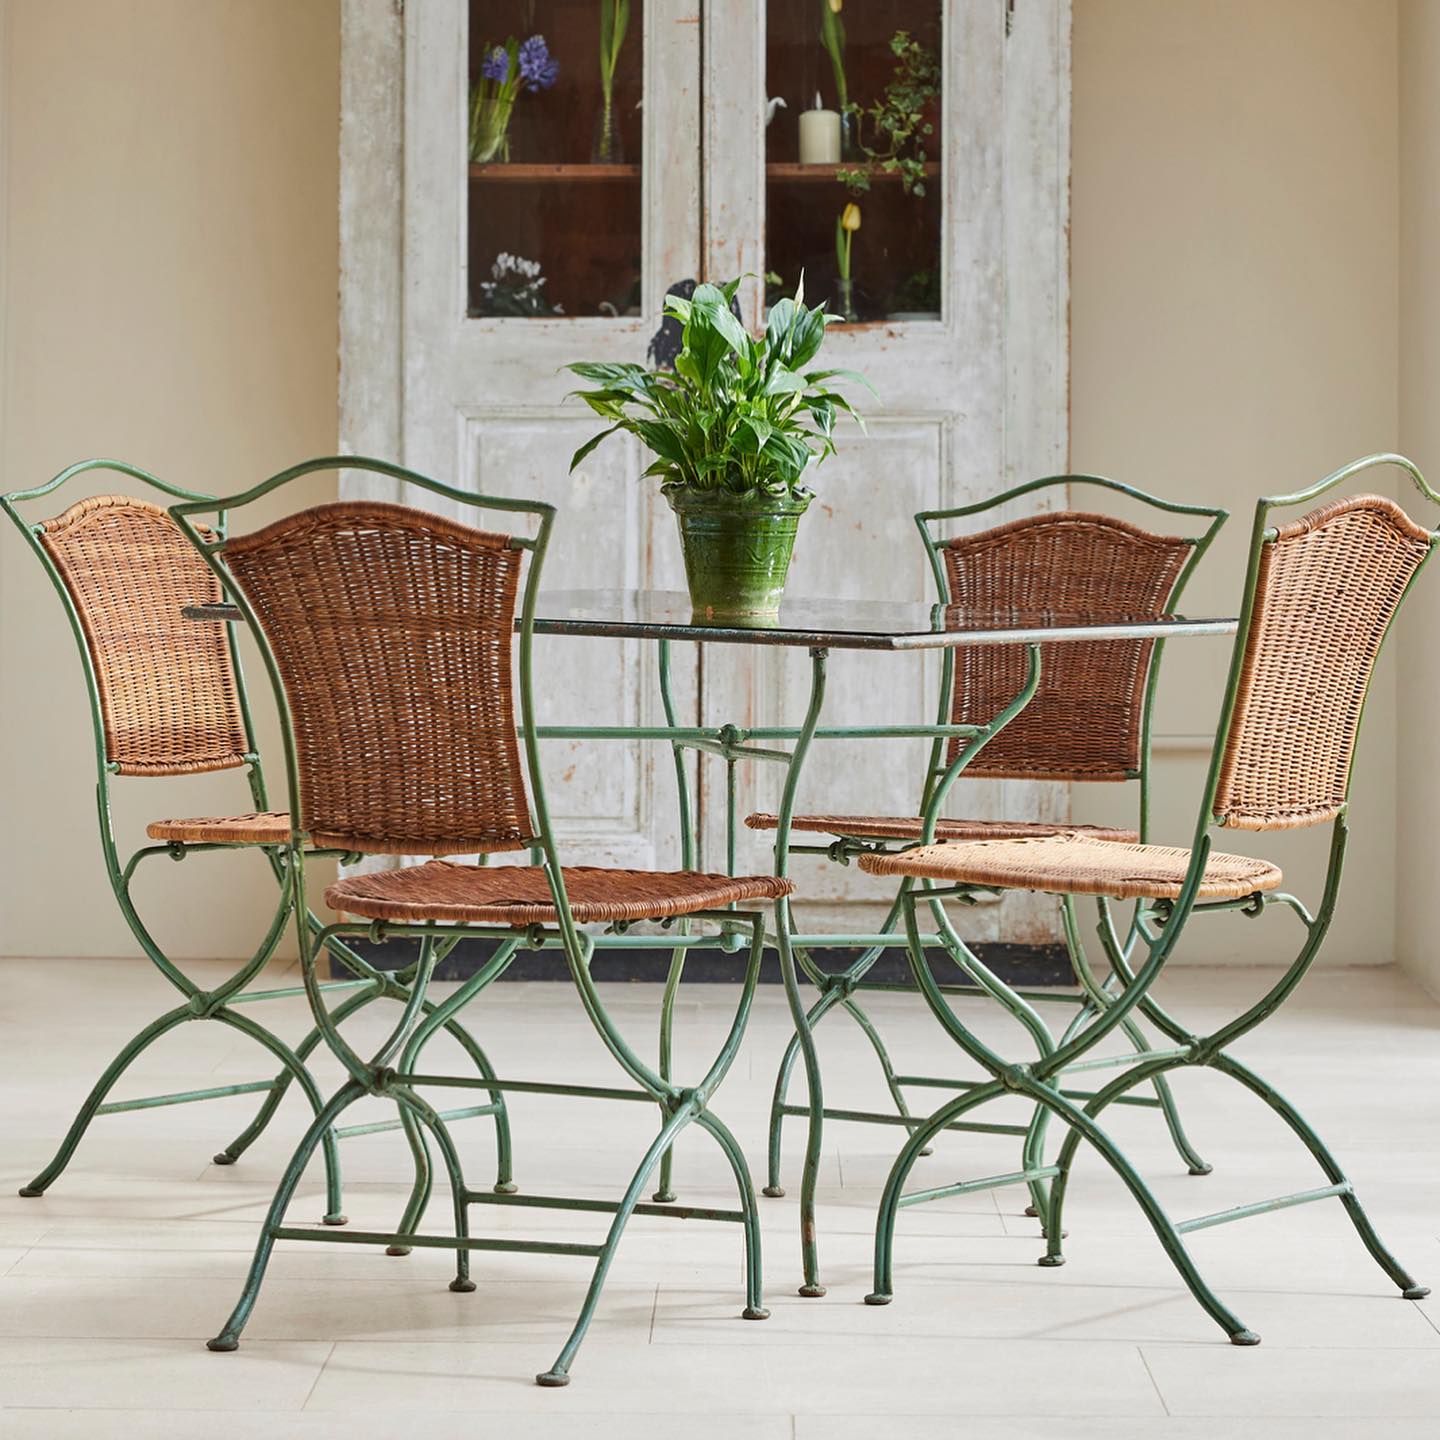 Rattan and metal dining furniture set is a great option for those warm summer days spent outside for a good meal with friends and family.